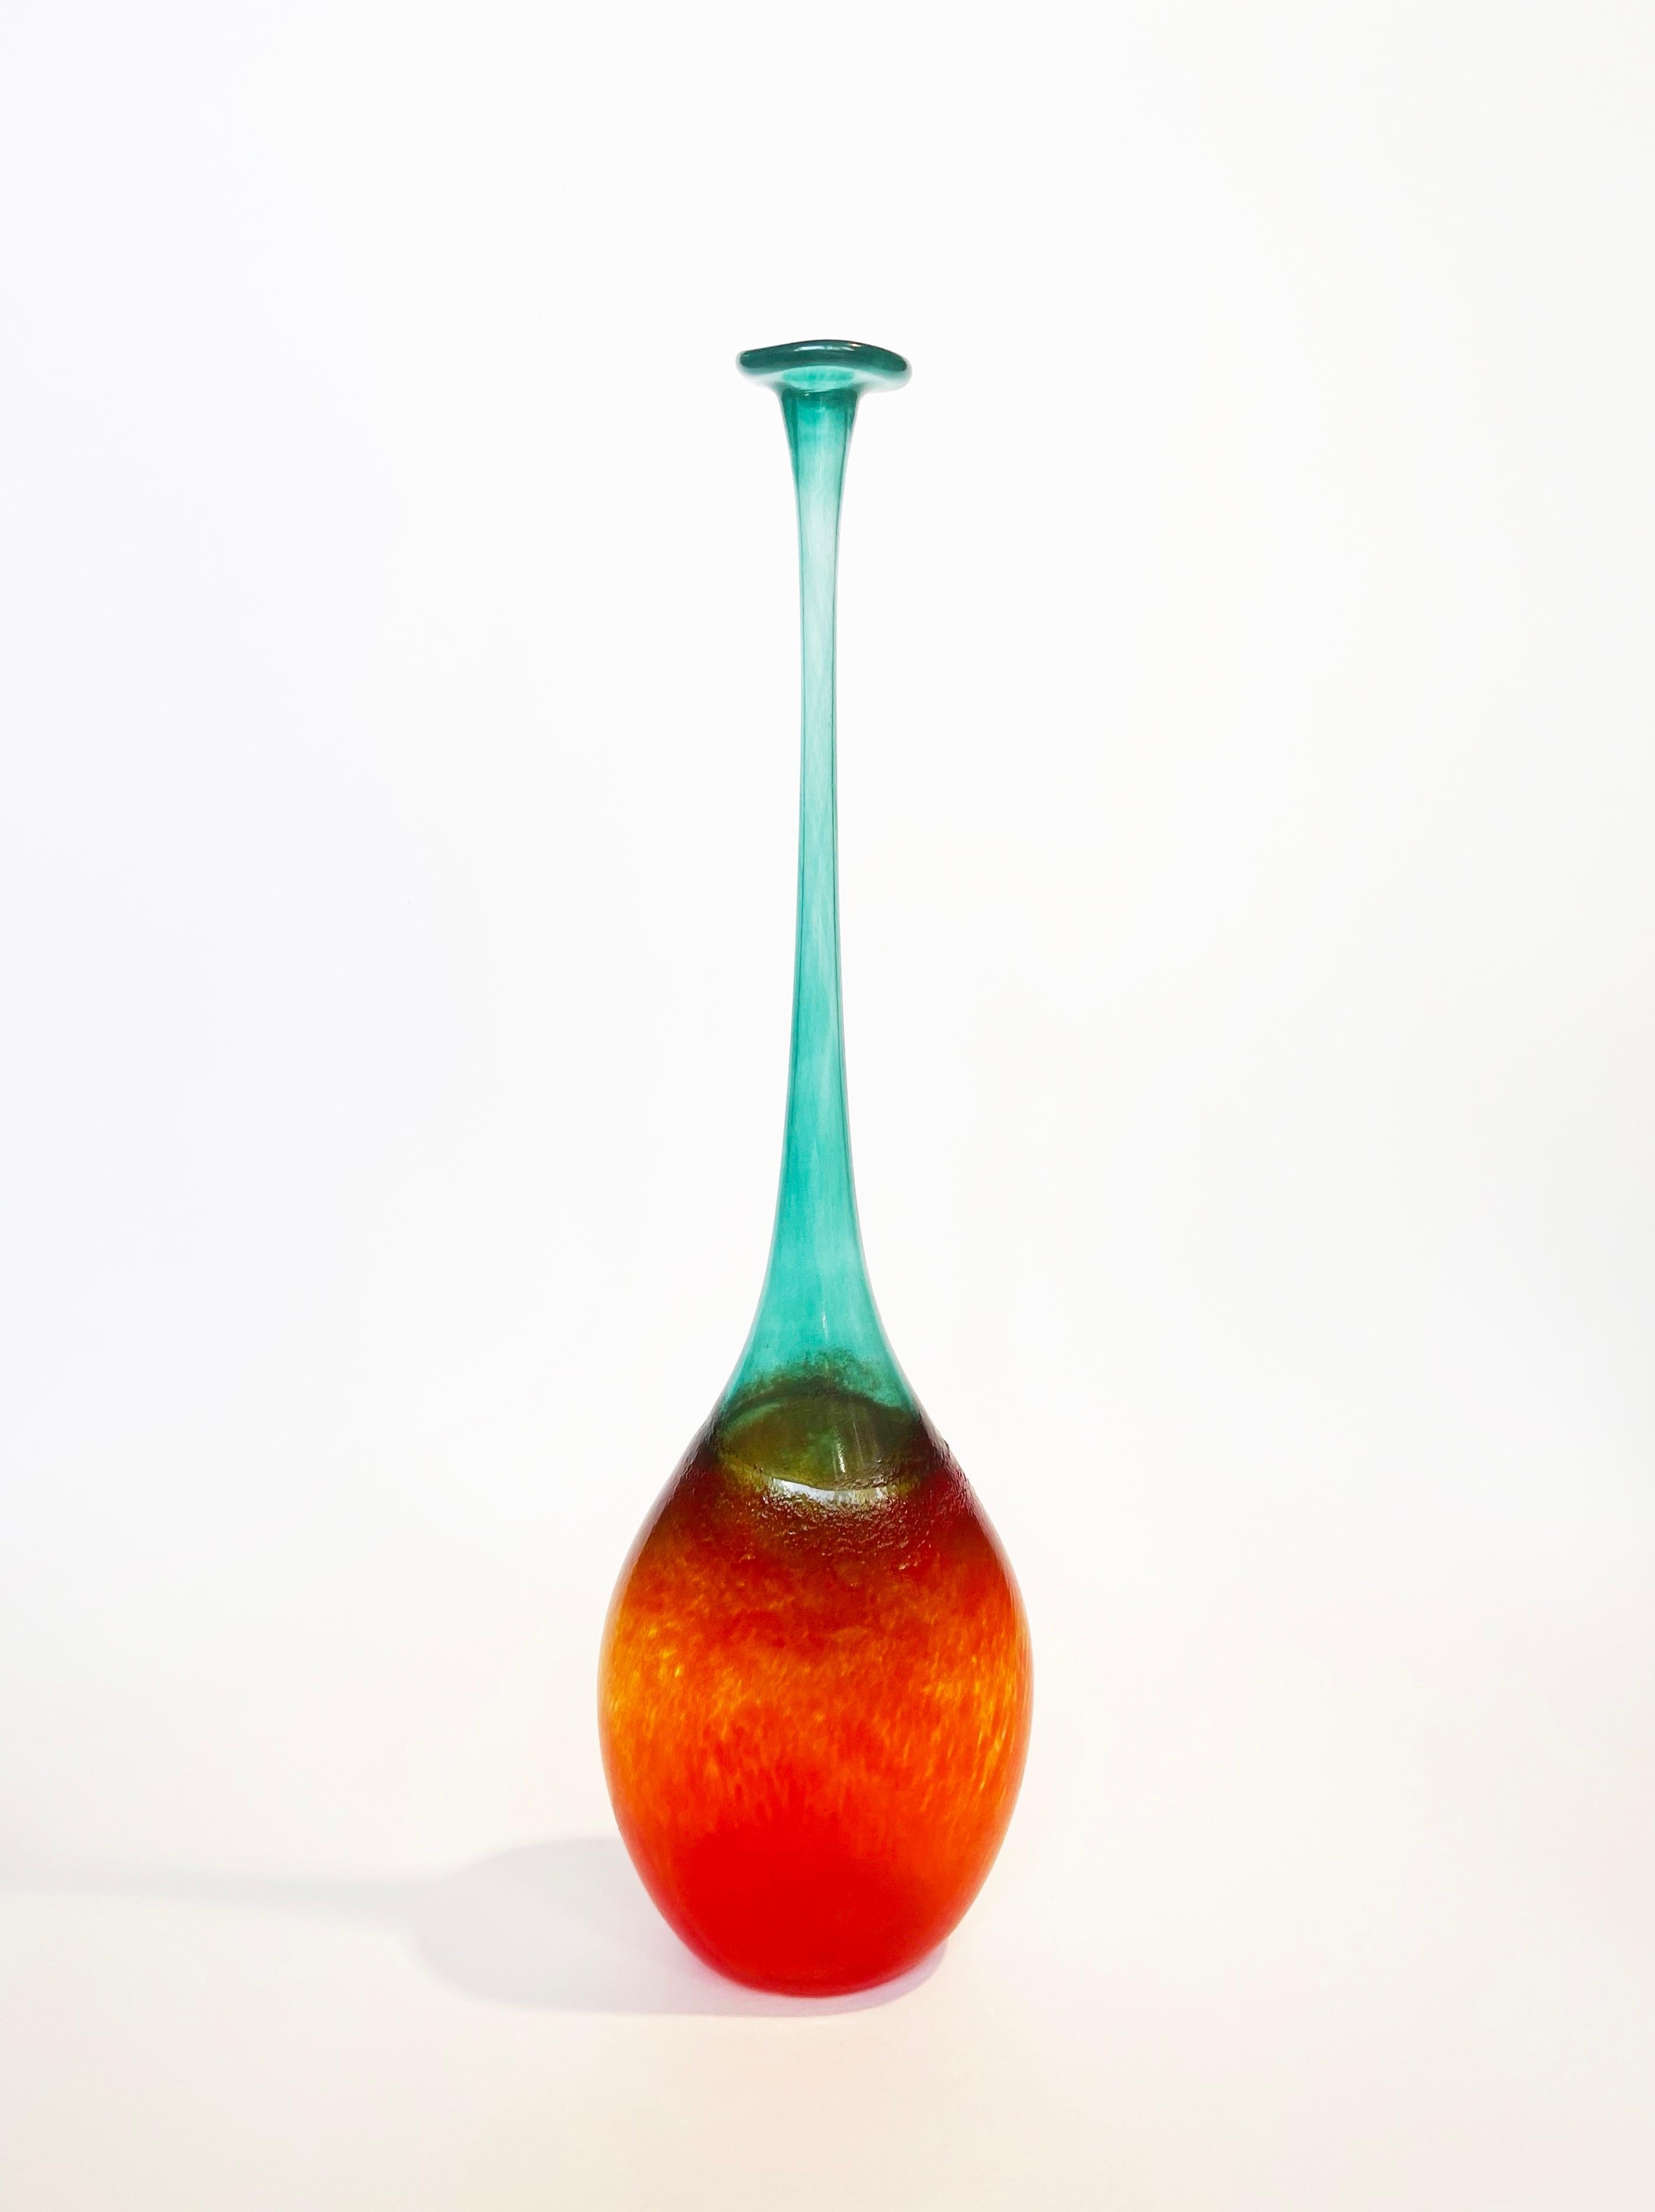 Unusual piece in colour and style, attributed or in the technique of Bertil Vallien, Sweden.
With a hint of a Murano swirl with dotted at the body of juicy mid orange to transparent, leading up to
a super elongated light turquoise neck with an